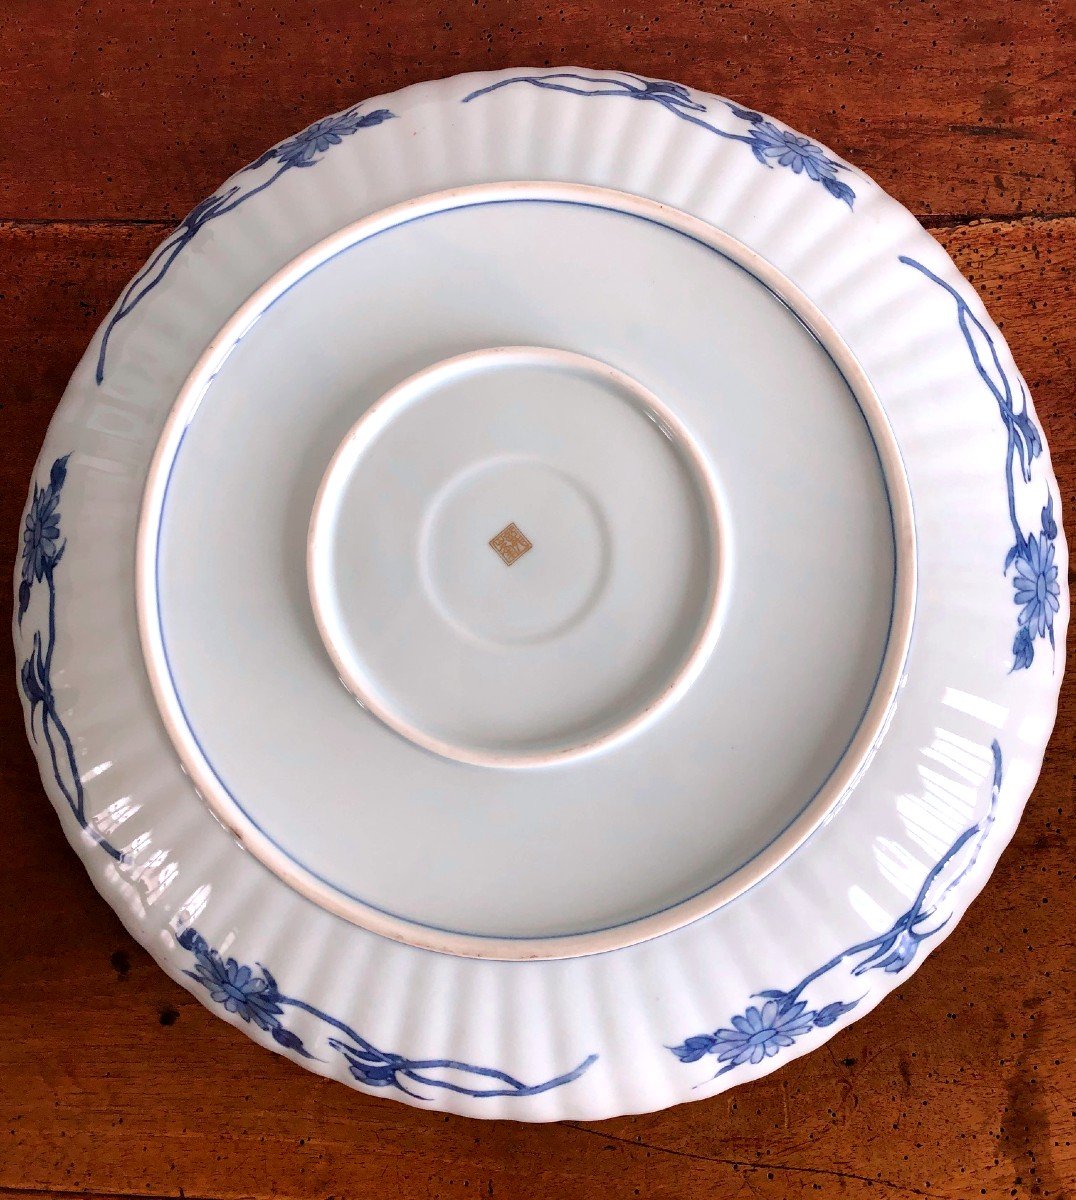 Imari Porcelain Dish With Blue Floral Decor In The Center, Japan-photo-1